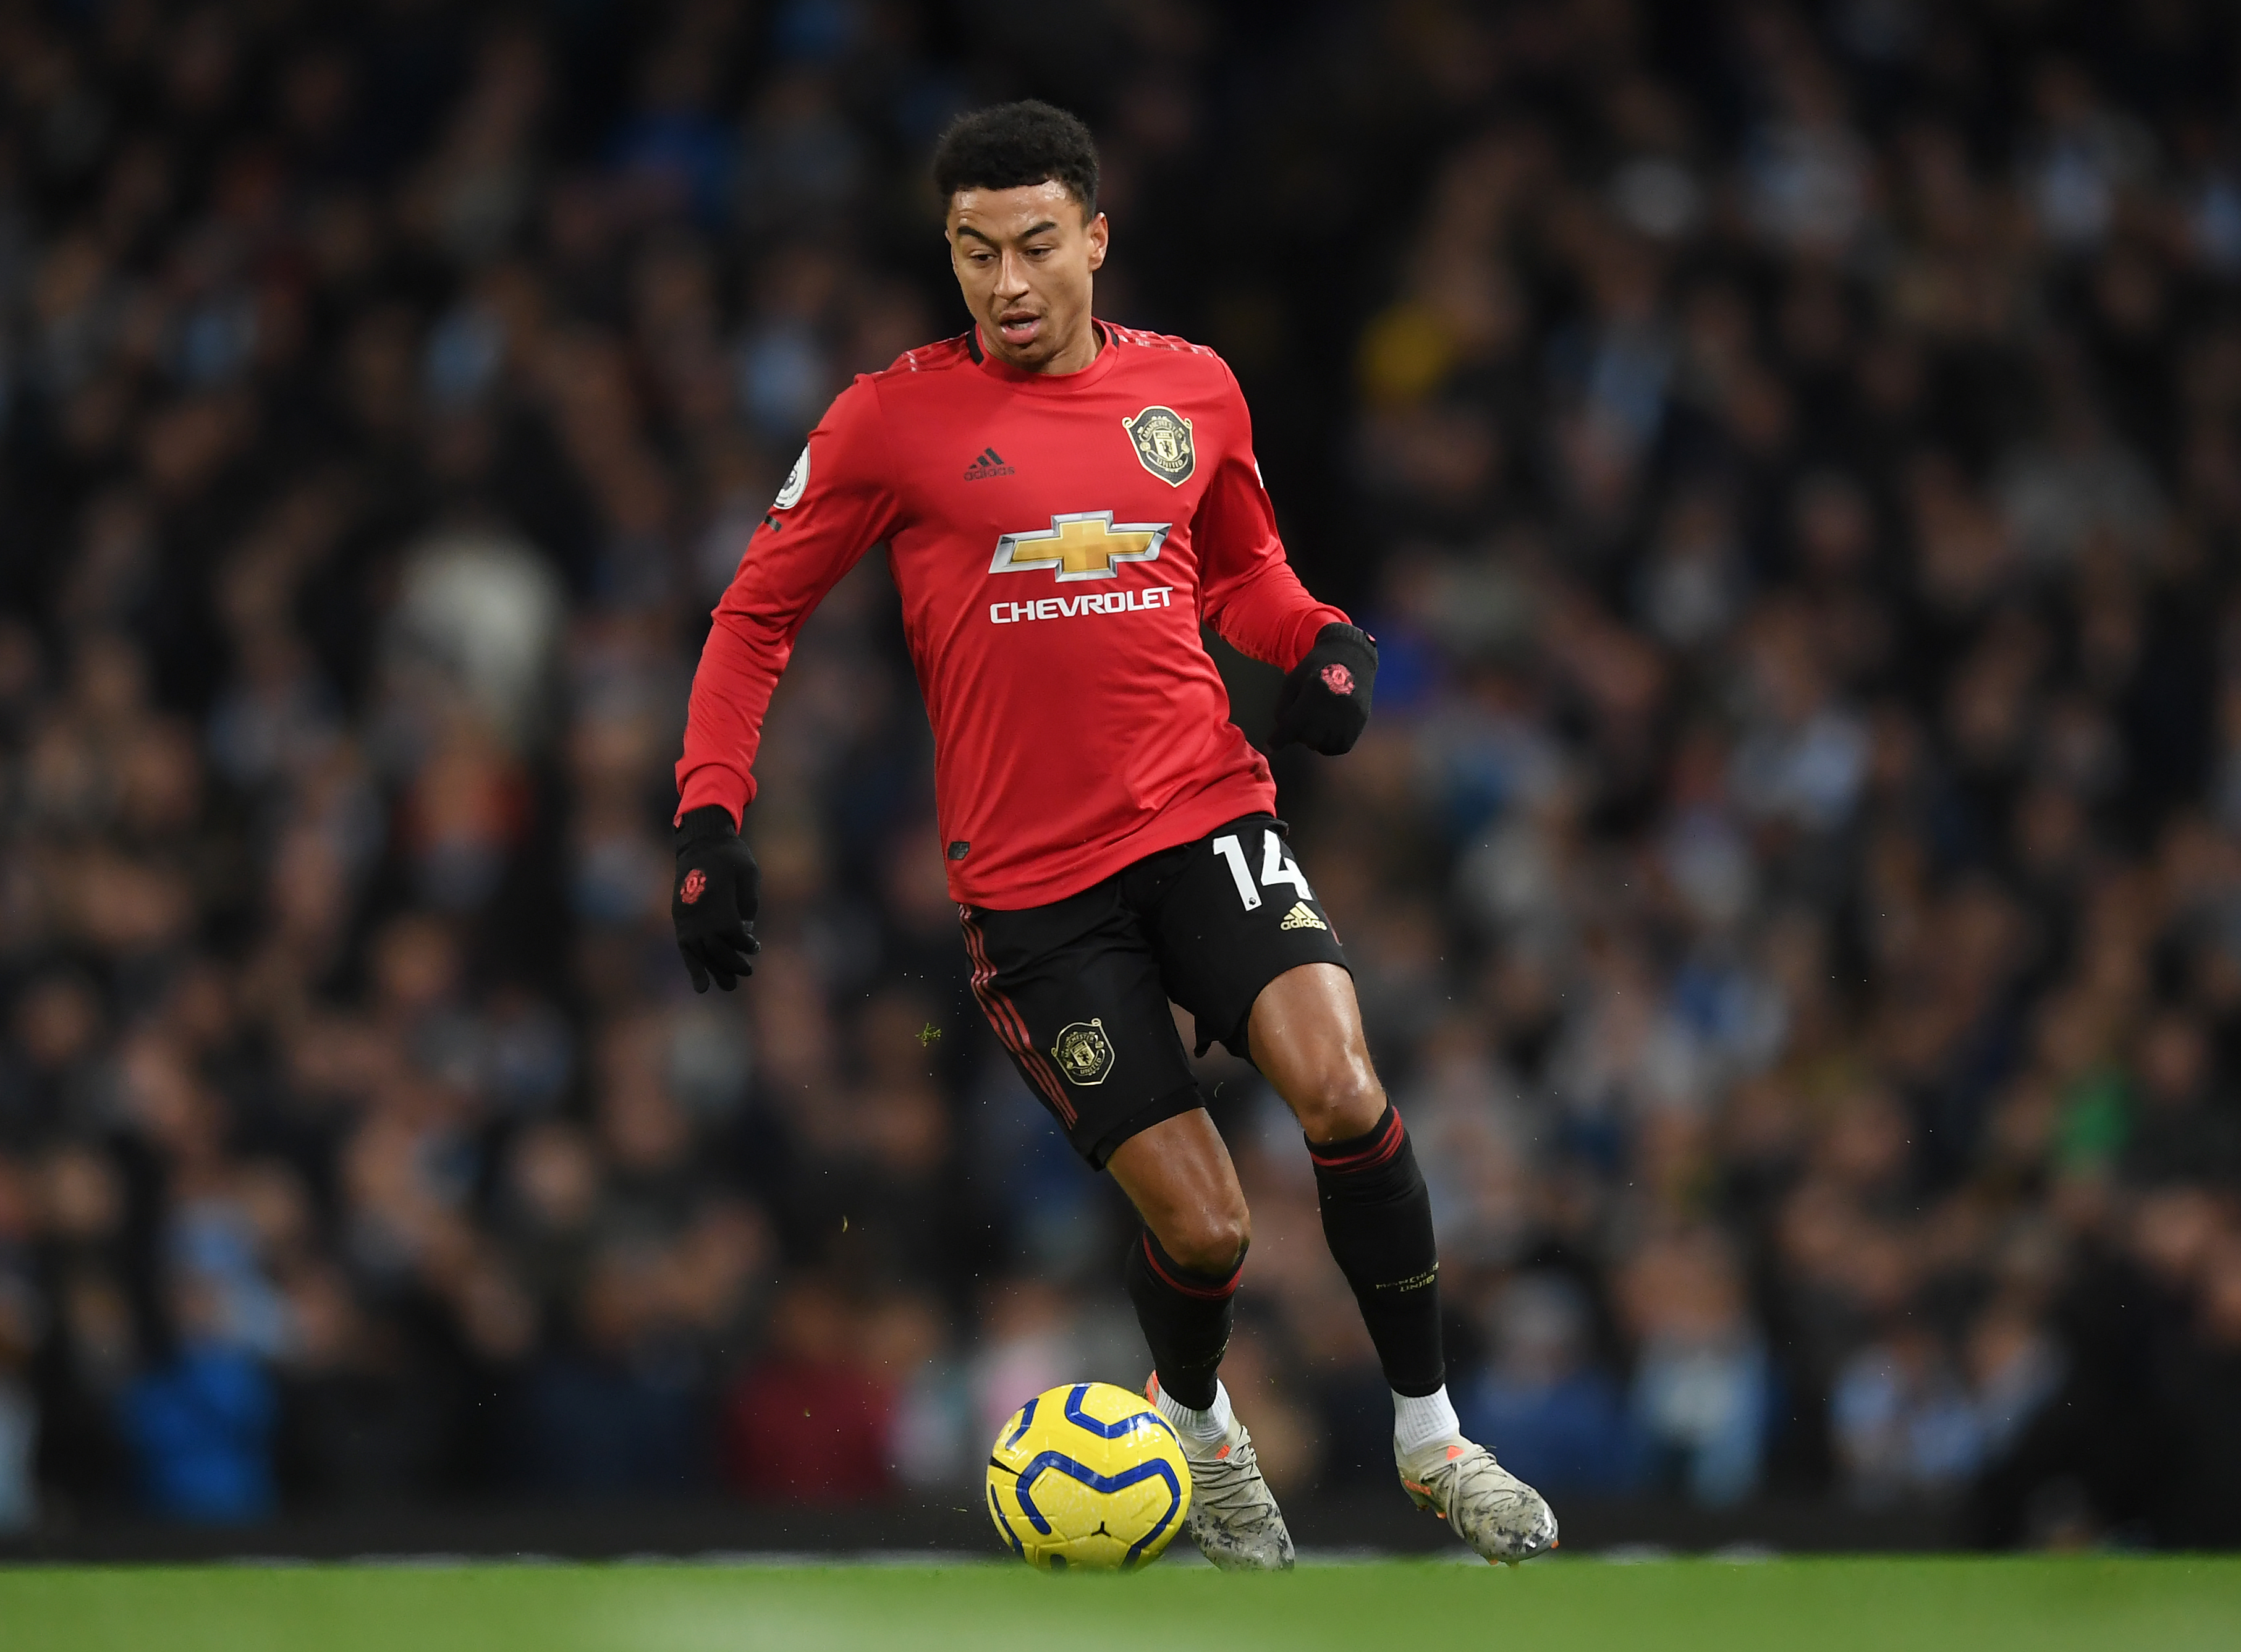 Jesse Lingard is likely to return after missing the midweek game (Photo by Michael Regan/Getty Images)